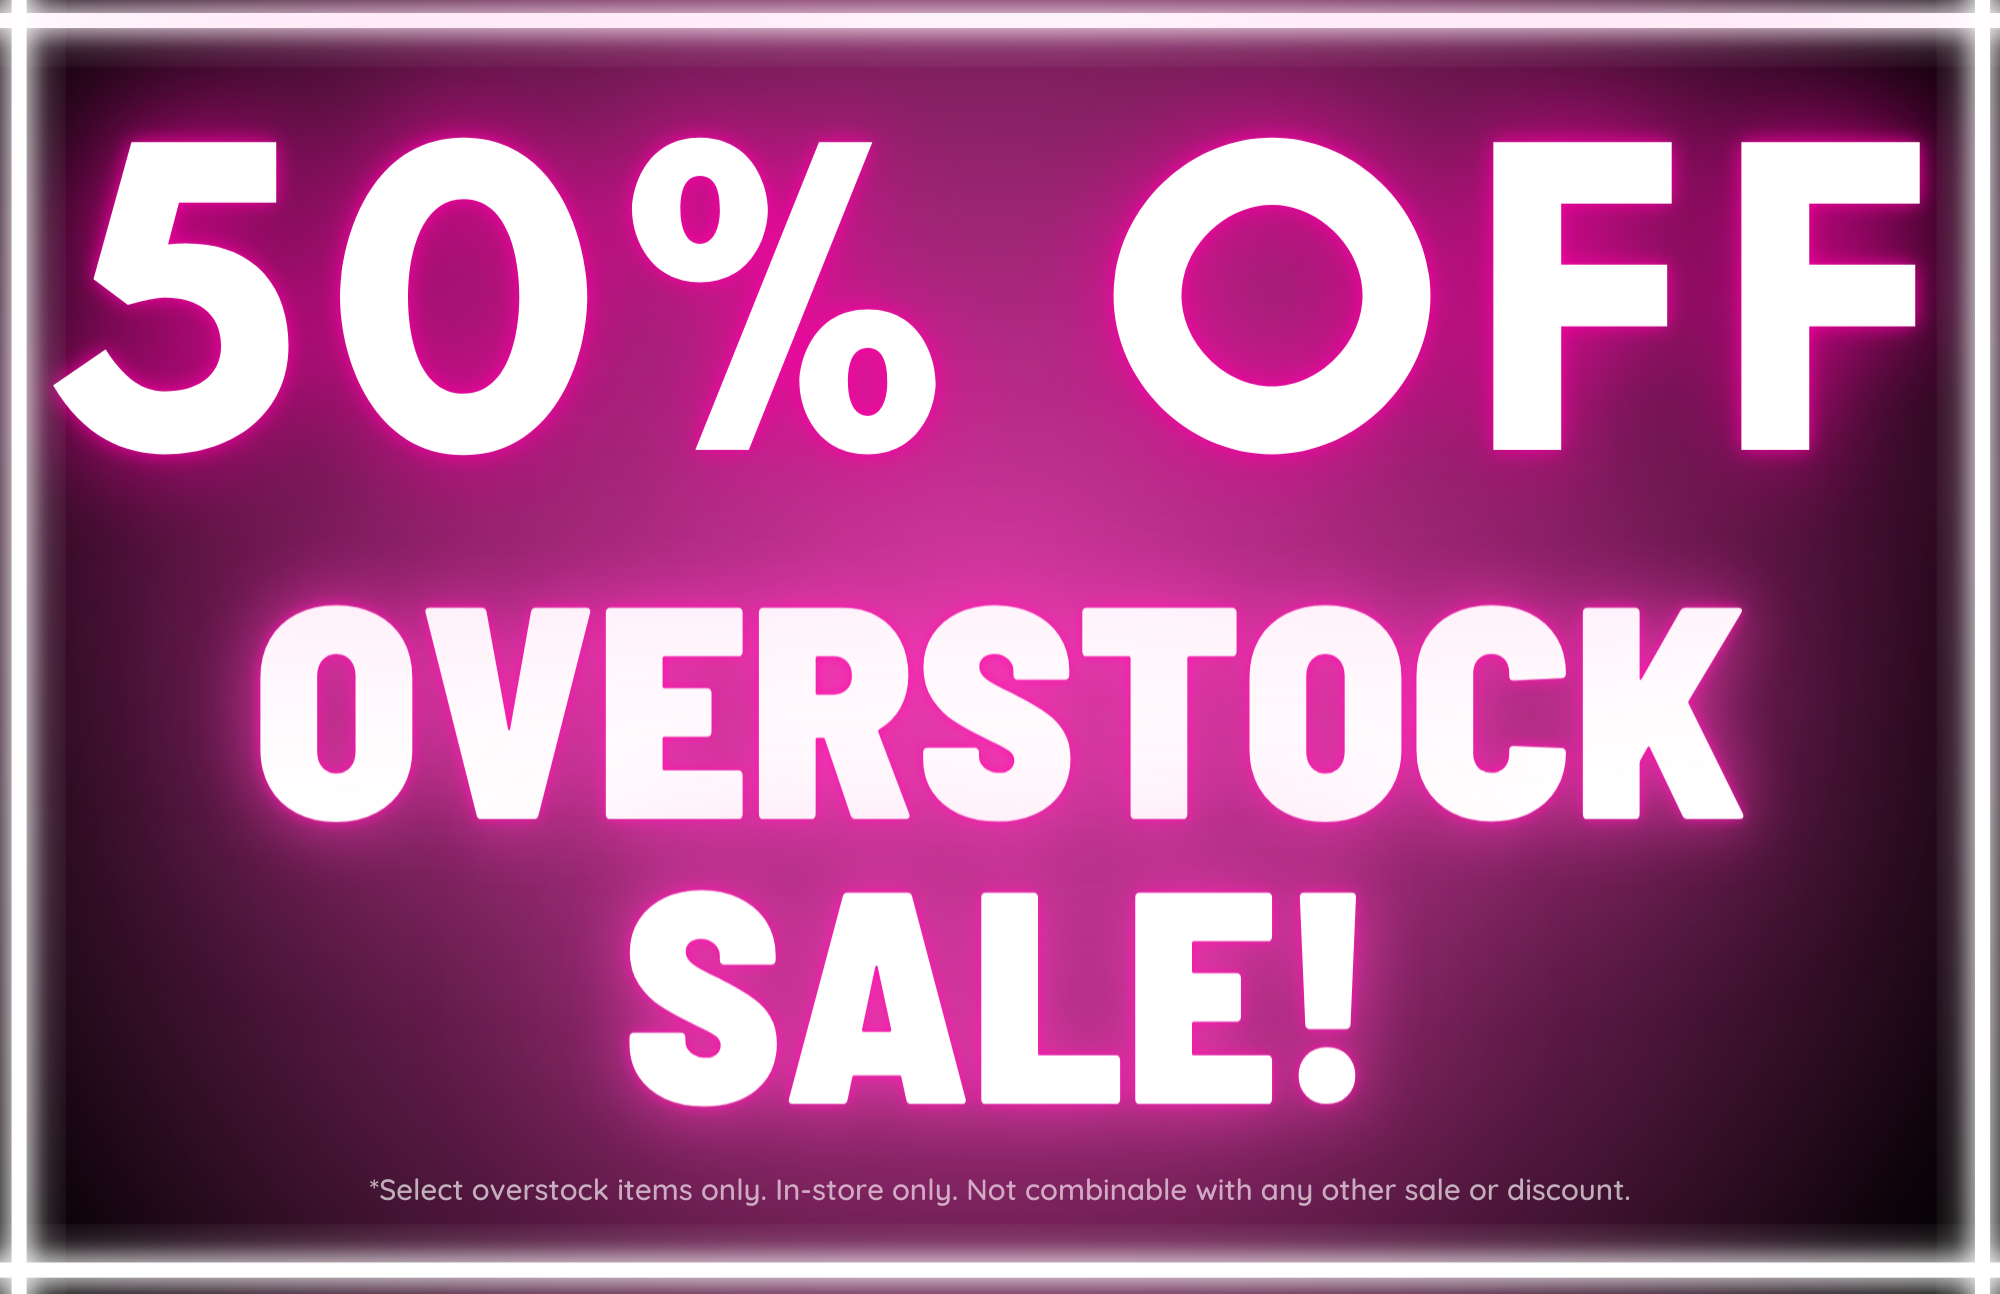 https://crystallographygems.com/wp-content/uploads/2023/06/Overstock-Sale-Poster-17-%C3%97-11-in-1.png